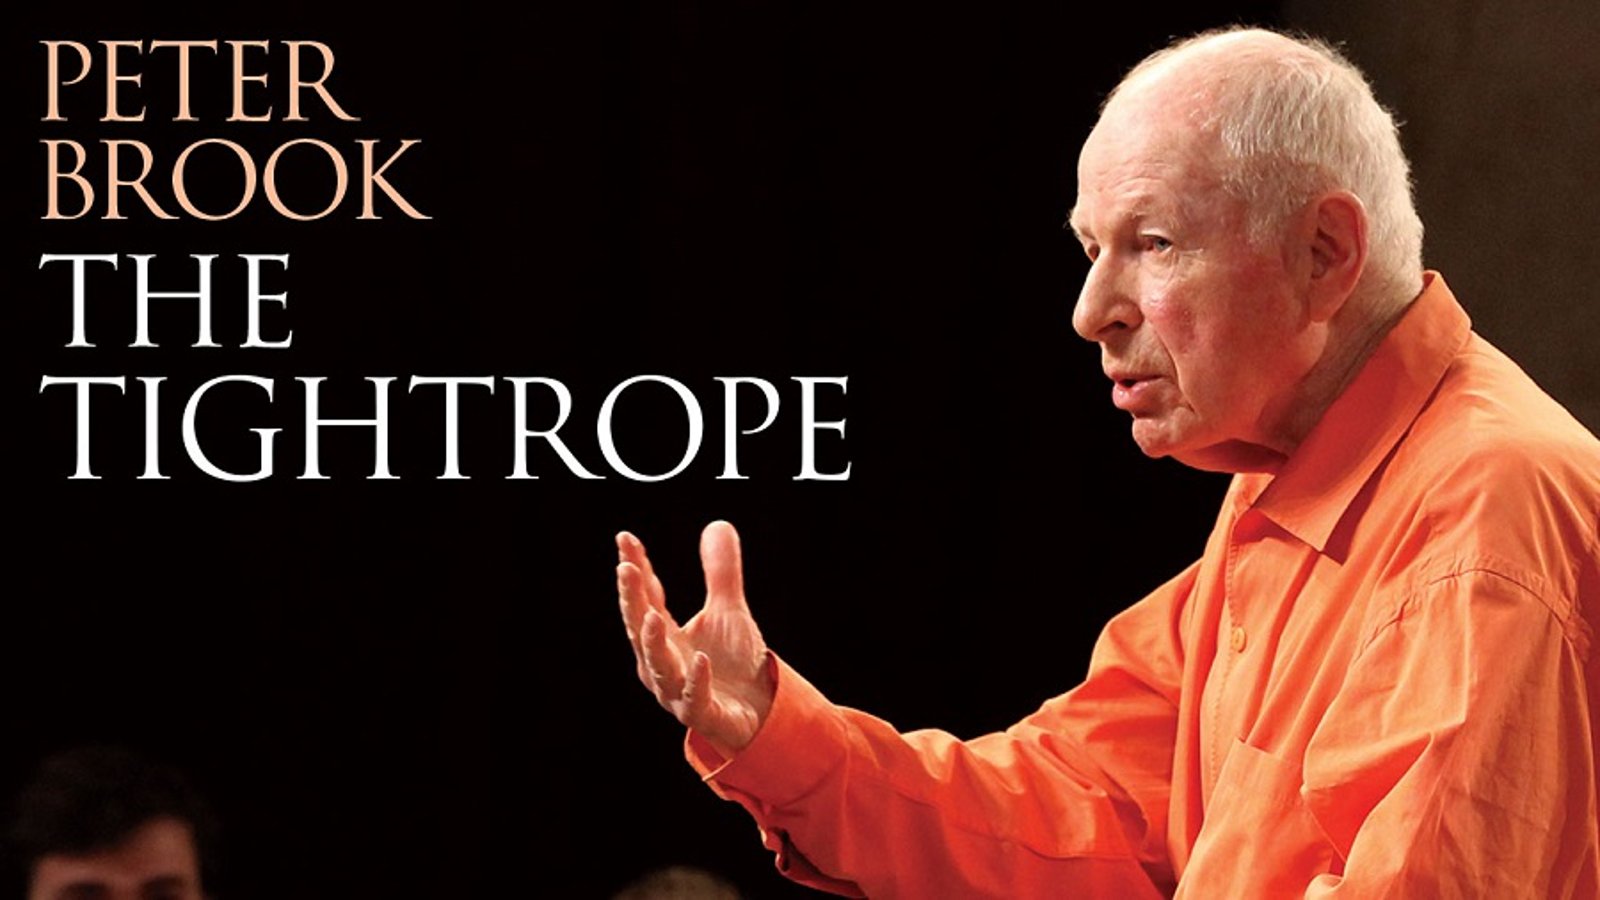 Peter Brook: The Tightrope